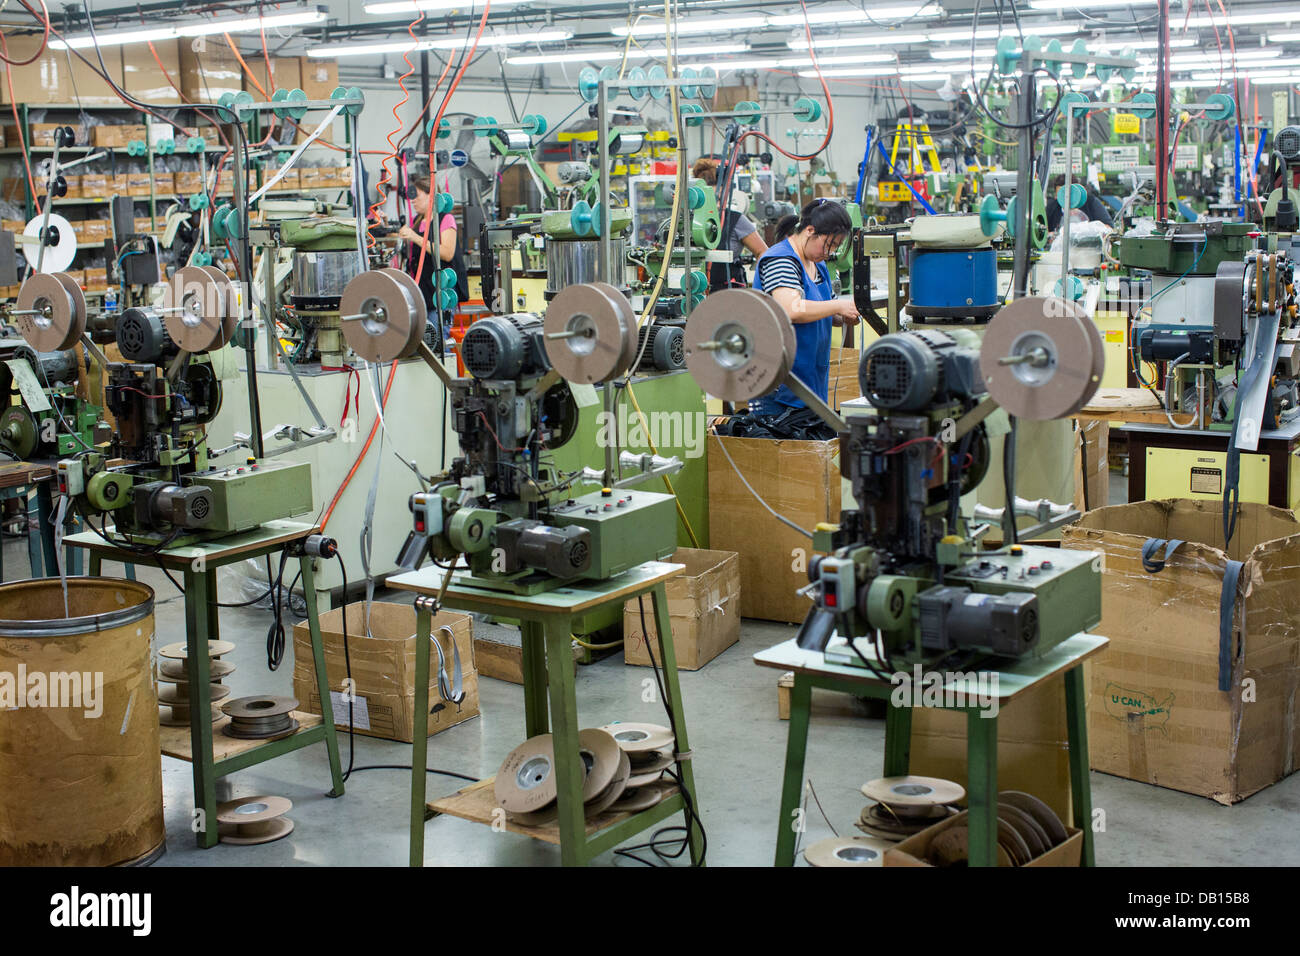 The UCAN zipper factory in downtown Los Angeles. Stock Photo